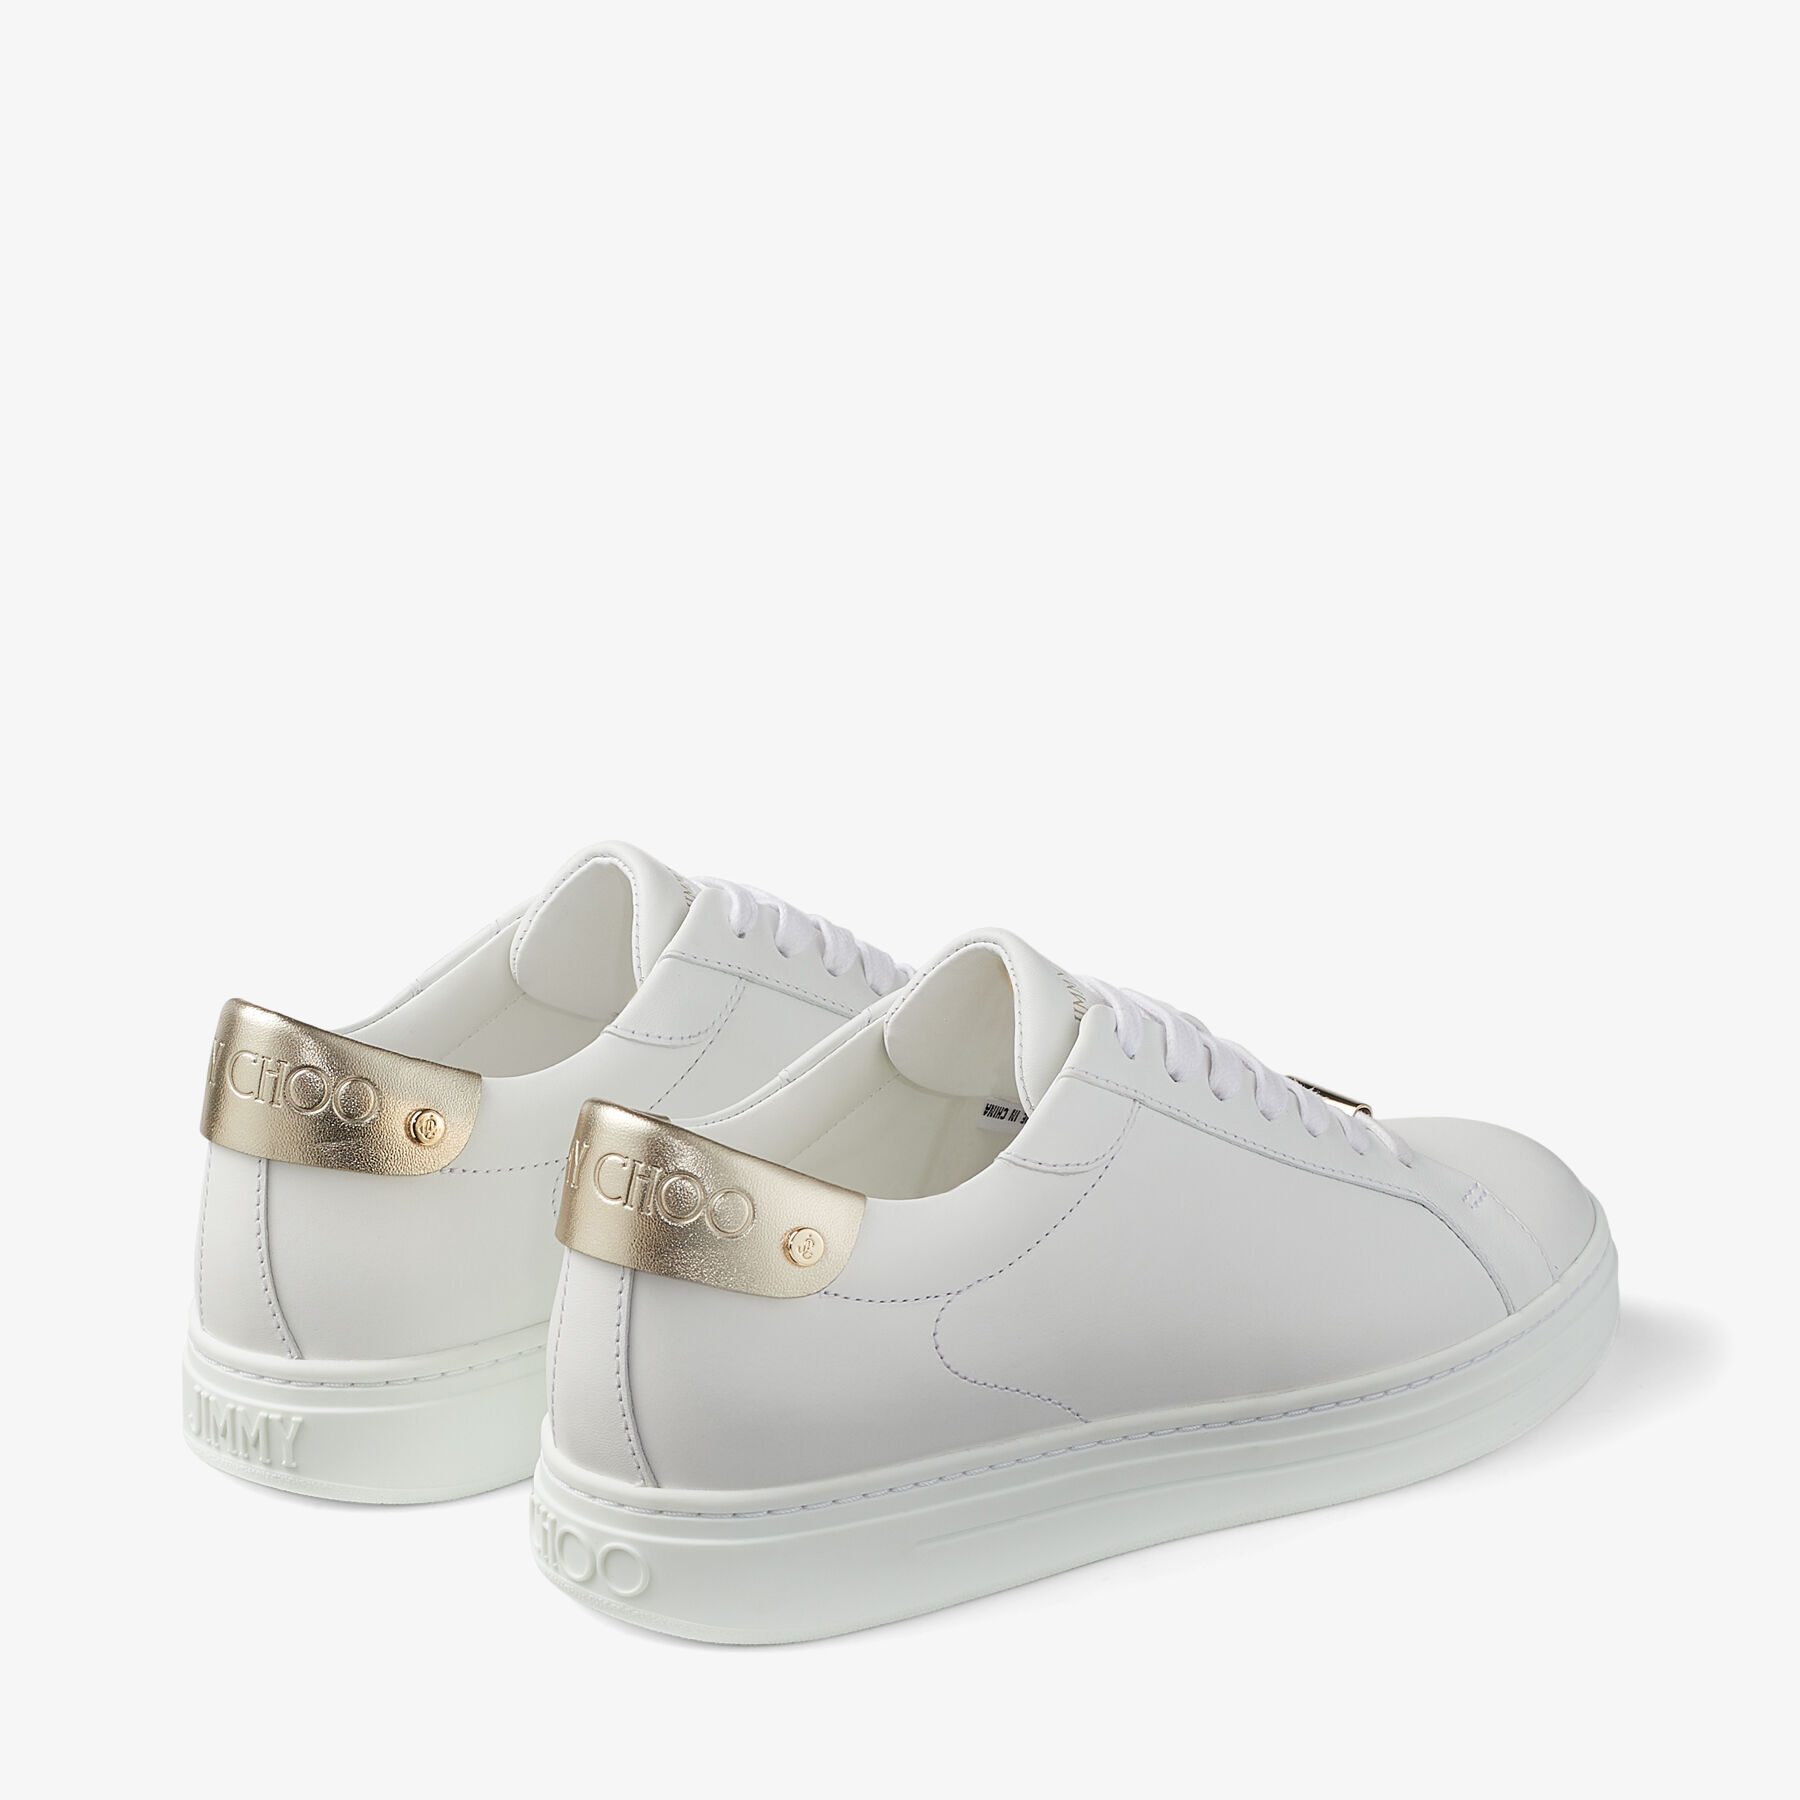 Trainers Jimmy Choo - Rome denim and leather sneakers with logo -  ROMEMJDMVDENIMNAVYWHITE